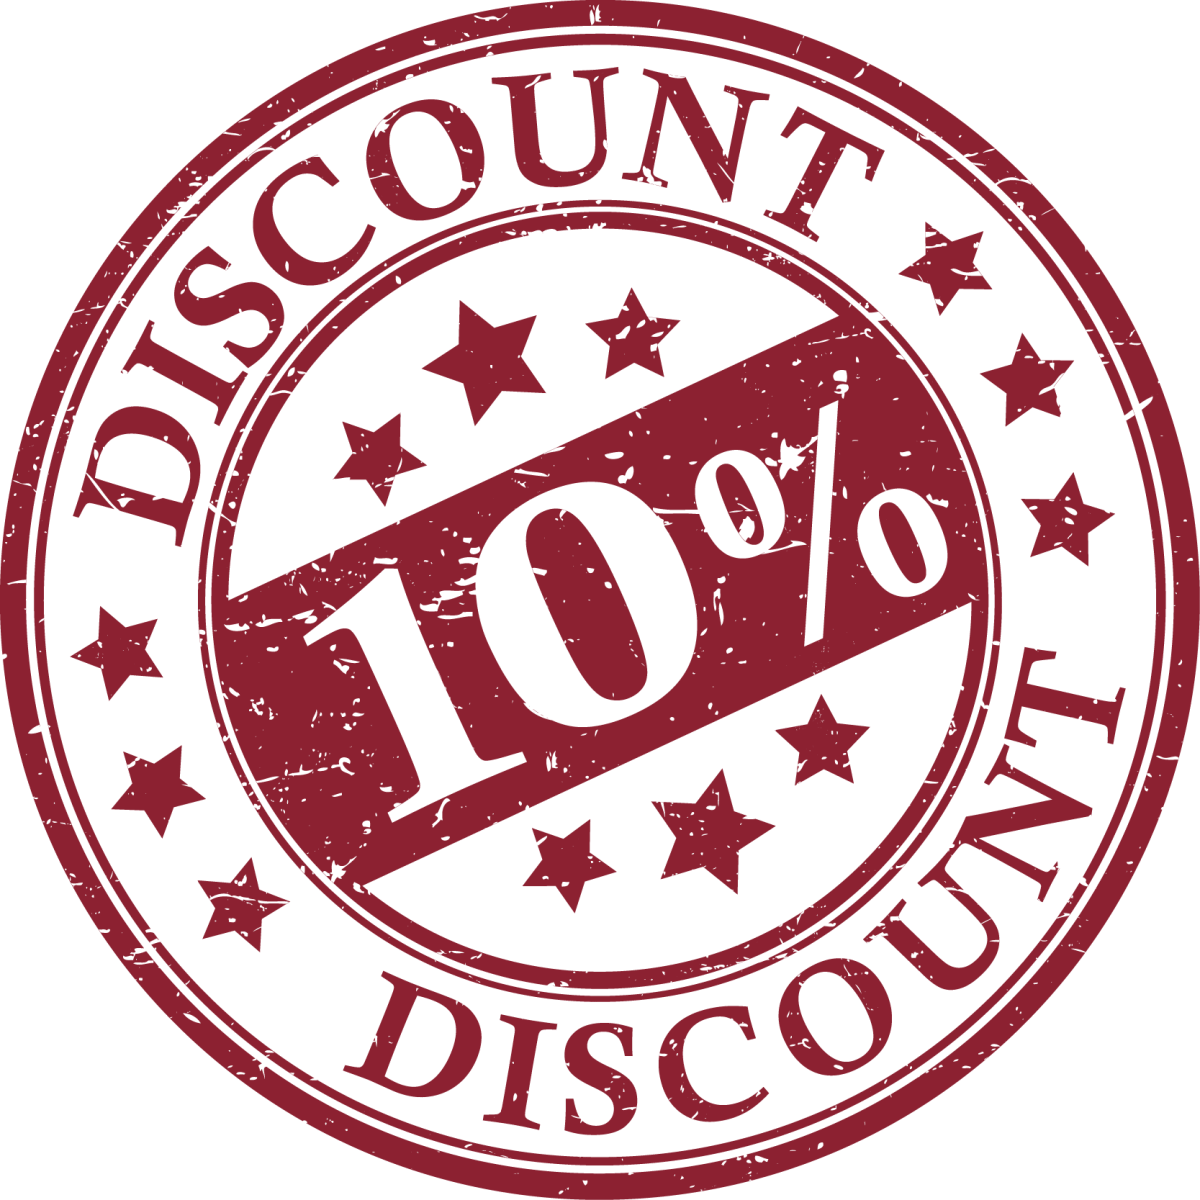 10% Off Discount